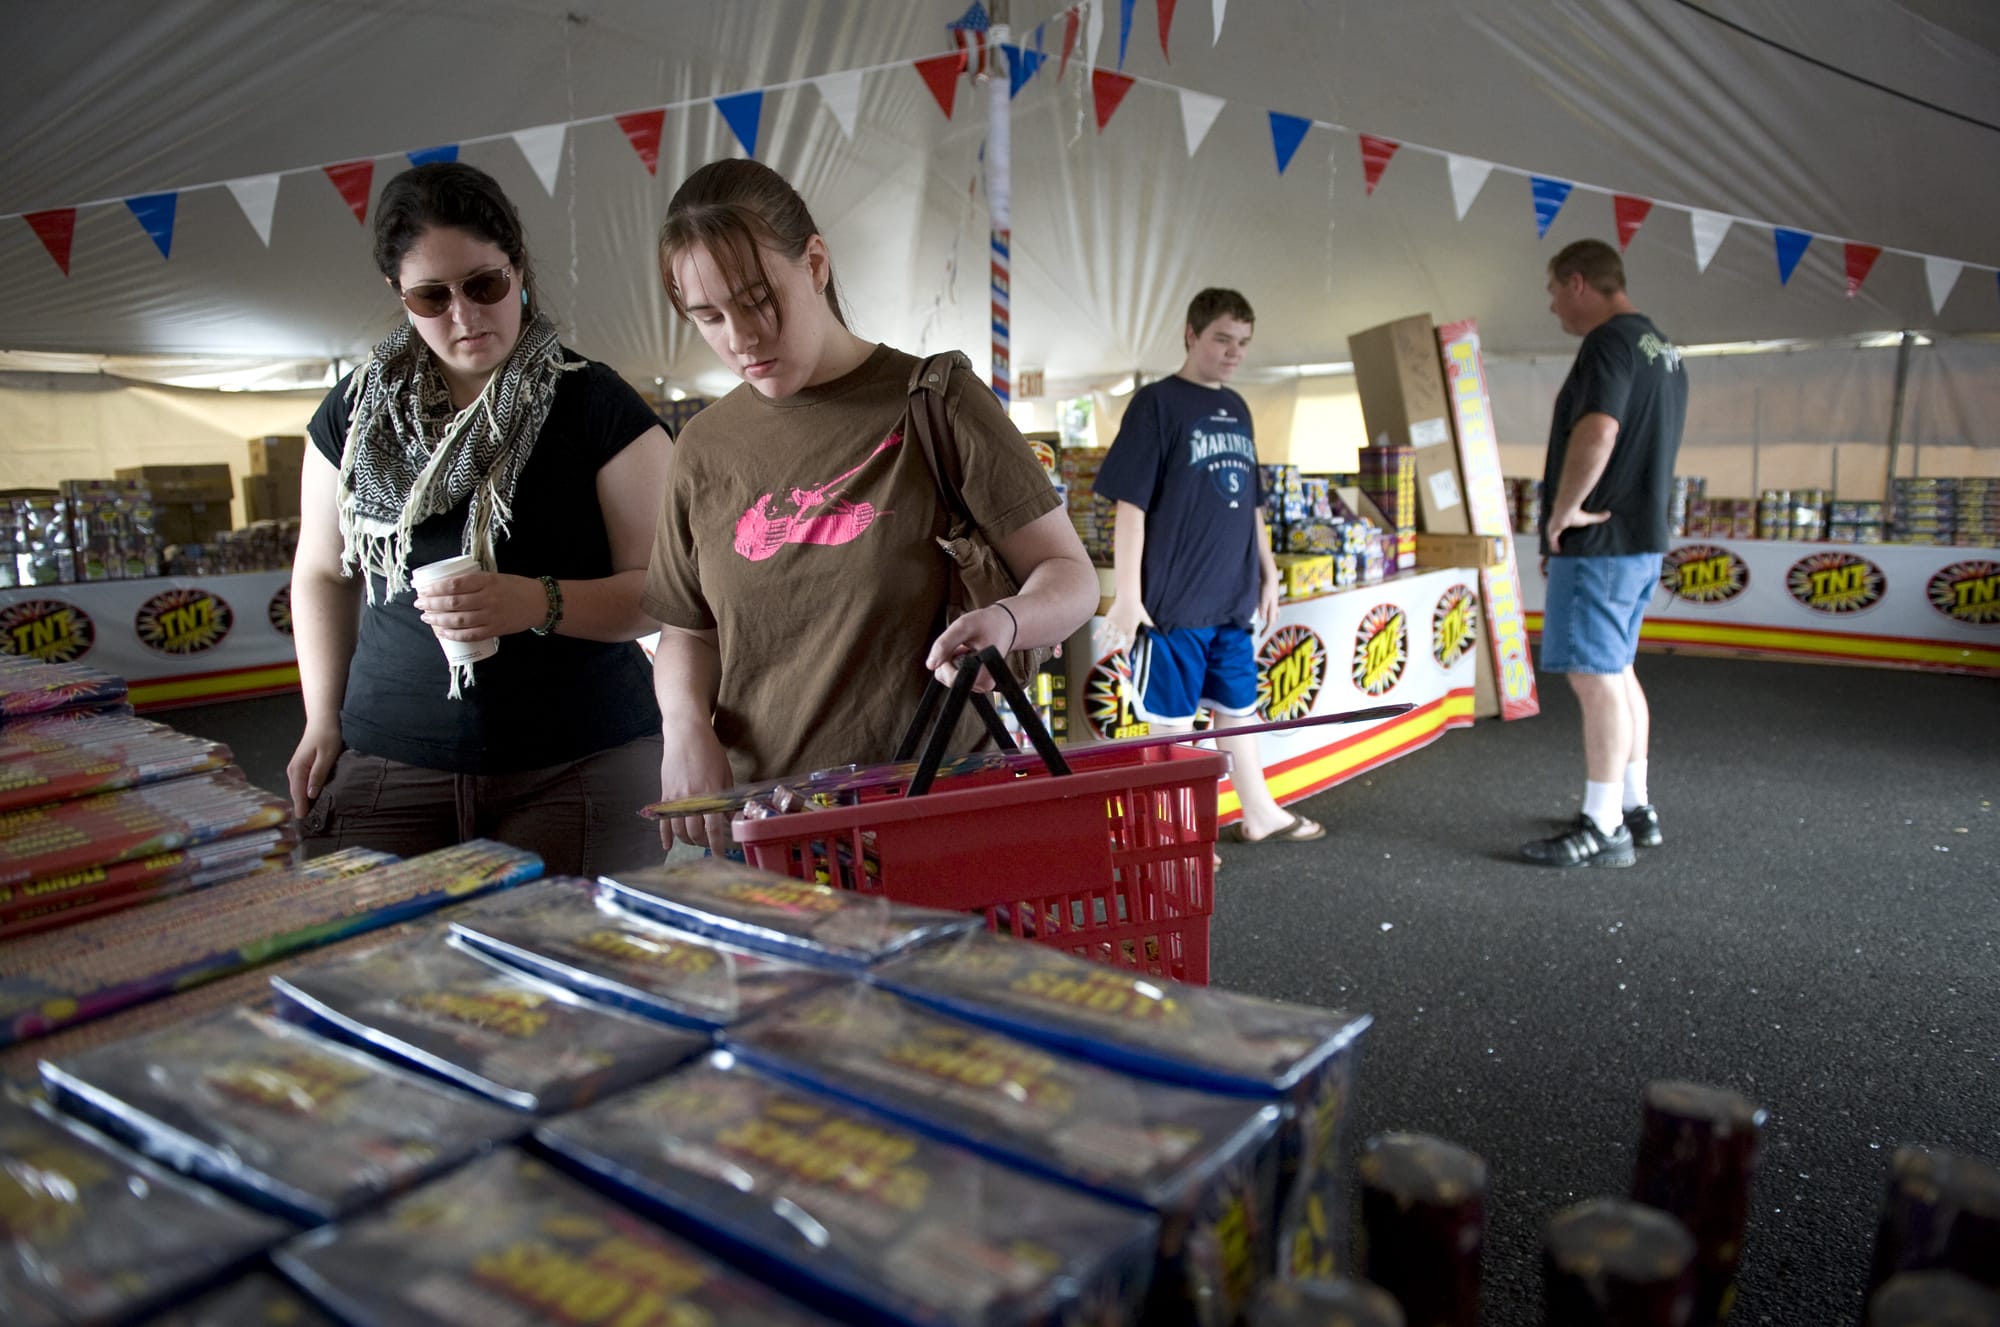 Veteran fireworks buyer Verity Wallis, 26, left, helps her friend Becky Kalhar, 26, purchase fireworks for her first time at the TNT Fireworks stand at SE Mill Plain Boulevard and SE Chkalov Drive on Monday June 28, 2010.